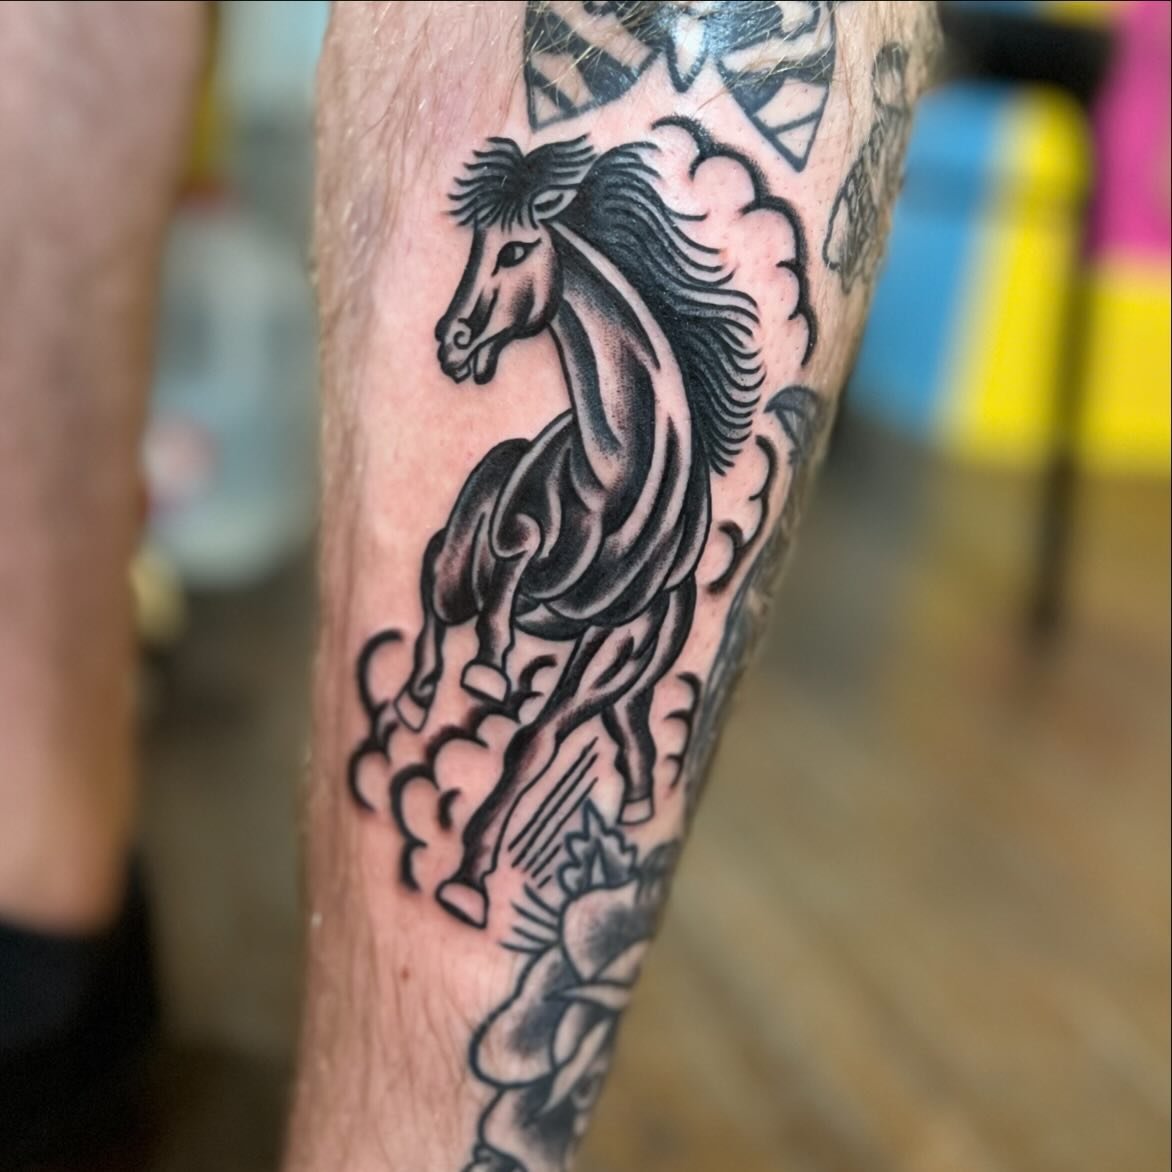 Fit this horse tucked right into some of the other tattoos I&rsquo;ve done on Chris&rsquo; leg. I absolutely love horses, in real life and in tattoos. This has always been one of my favorite pieces of flash, stoked to get to finally tattoo it.